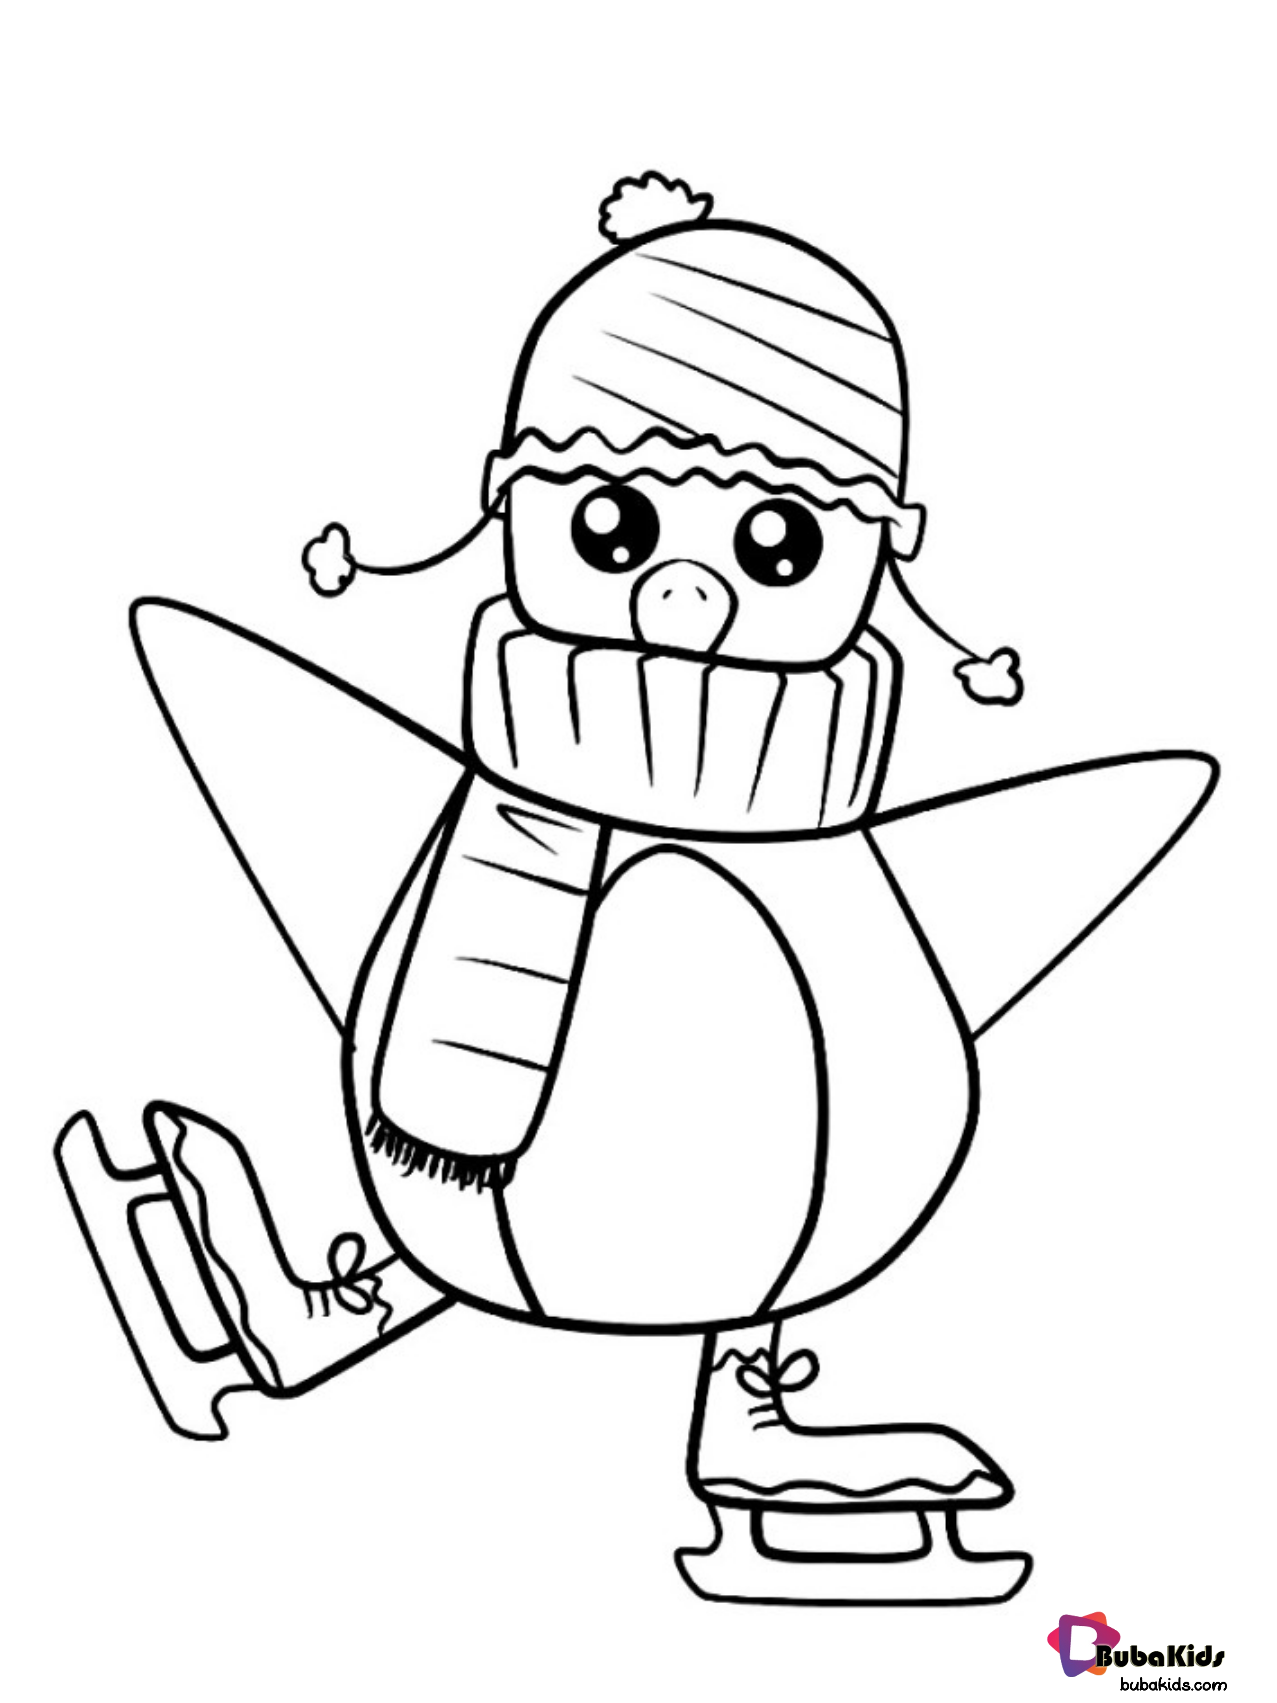 Free printable Cute Penguin coloring page. Wallpaper